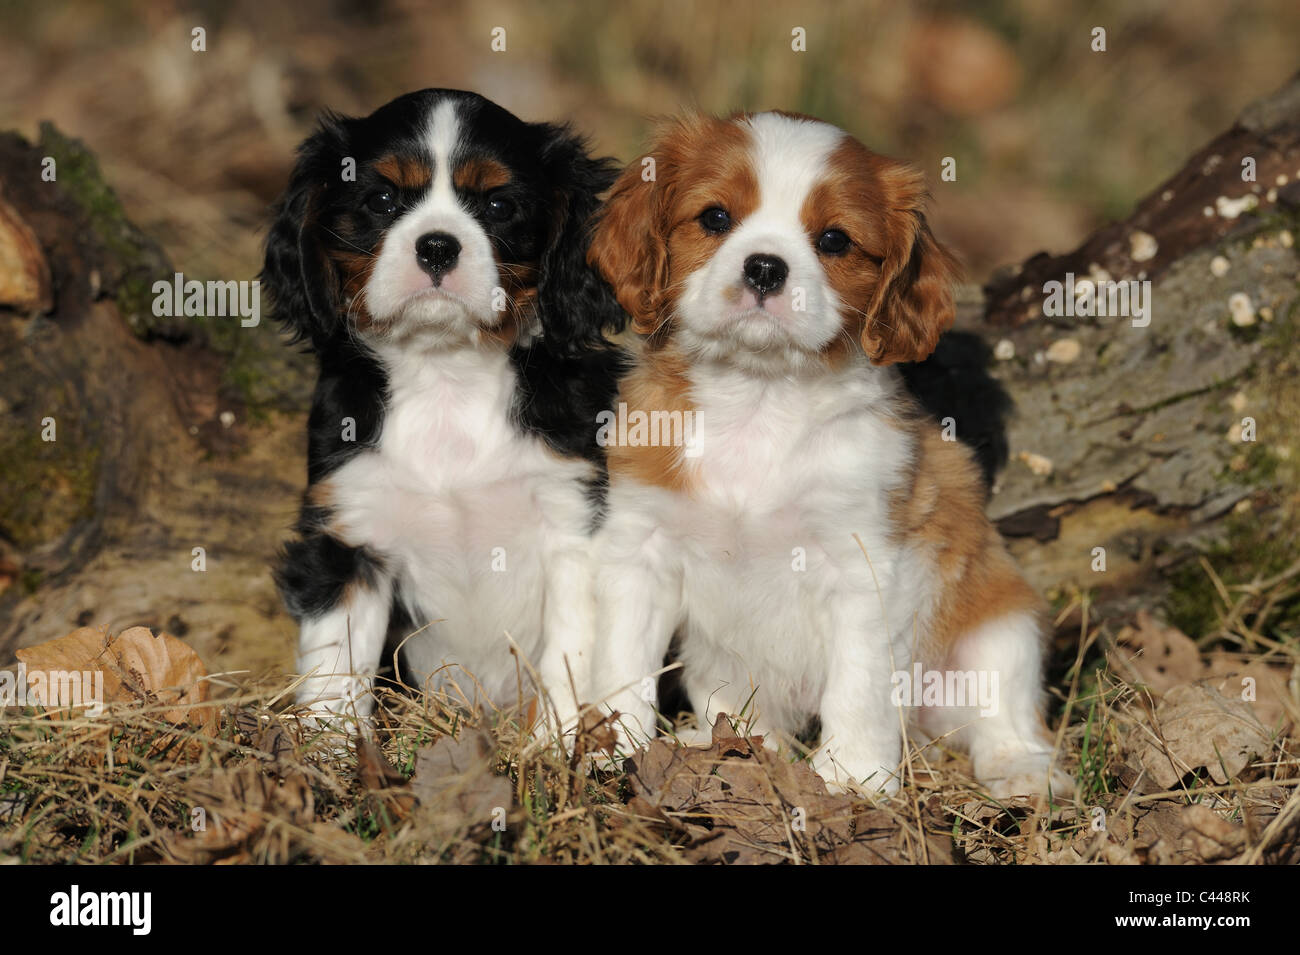 Cavalier King Charles Spaniel (Canis lupus familiaris), two puppies sitting in front of a log. Stock Photo